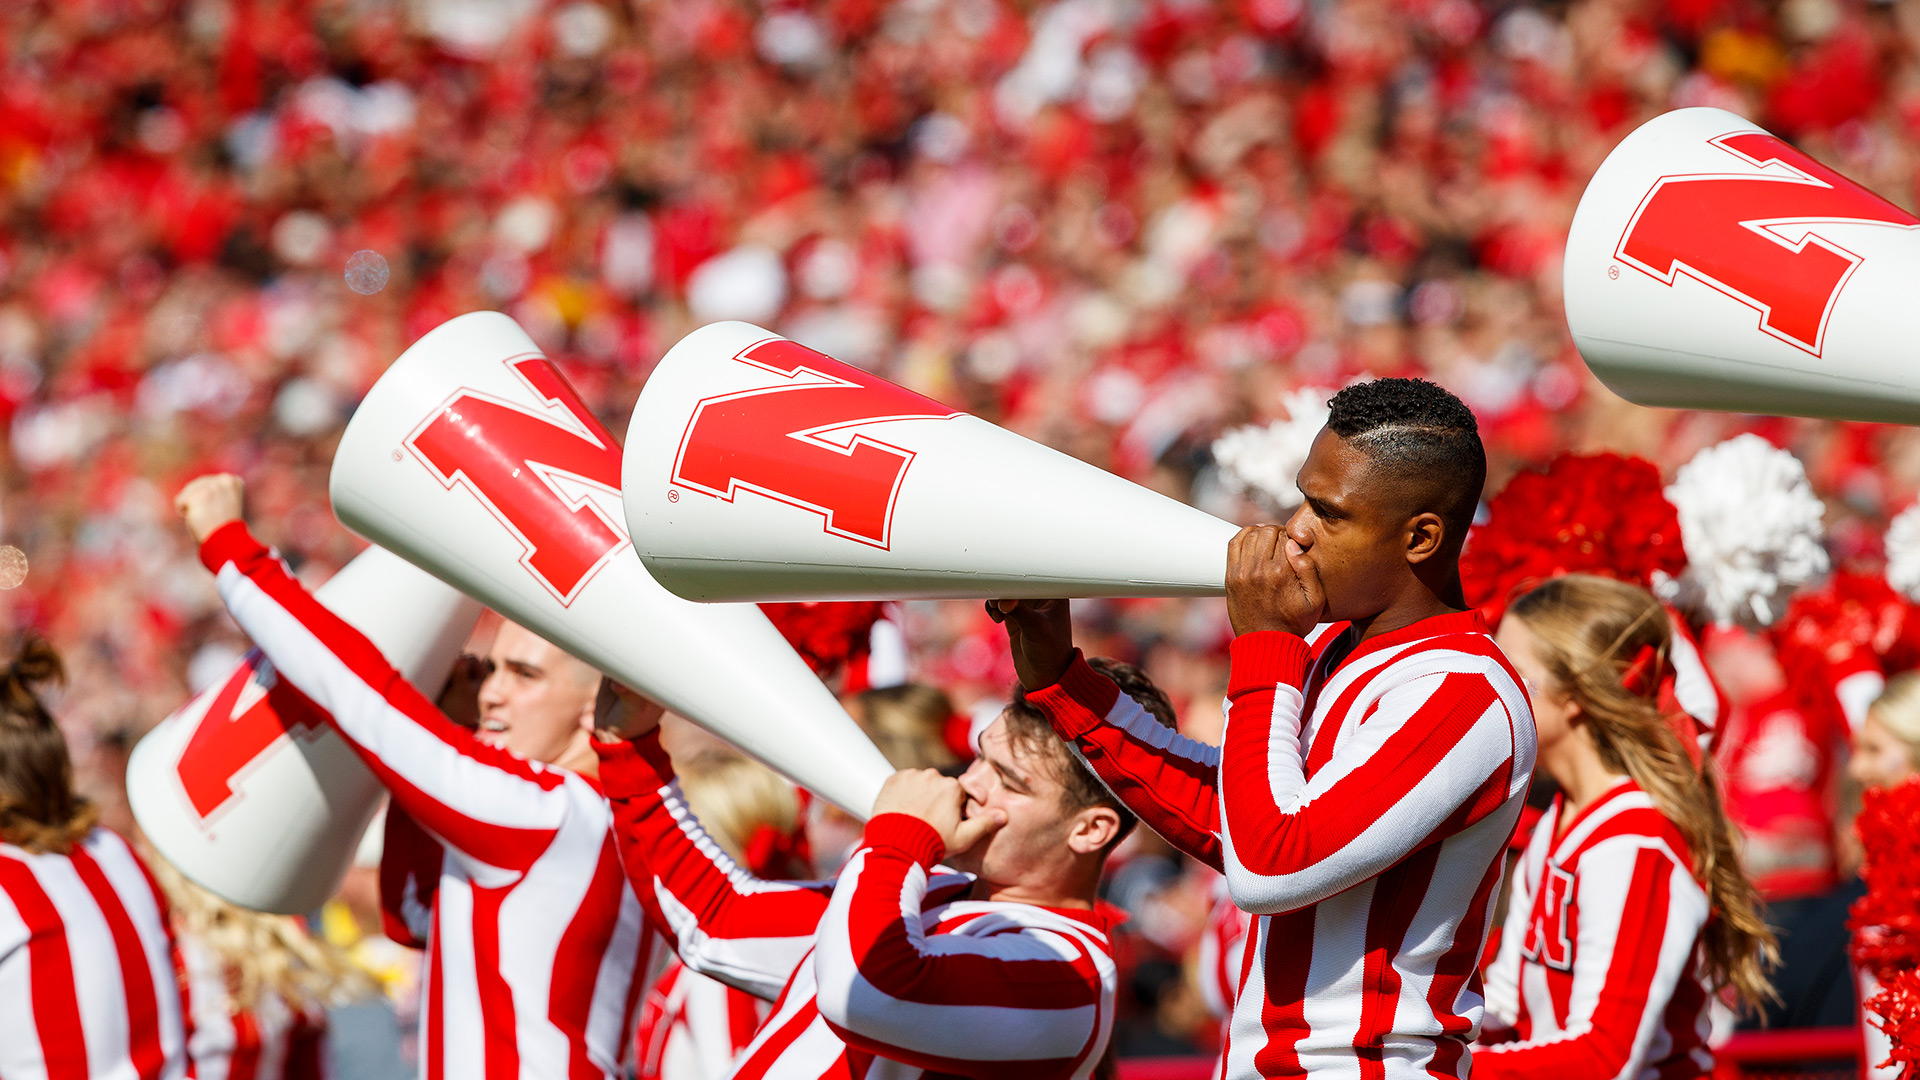 The male cheerleaders use their megaphones to rally the crowd